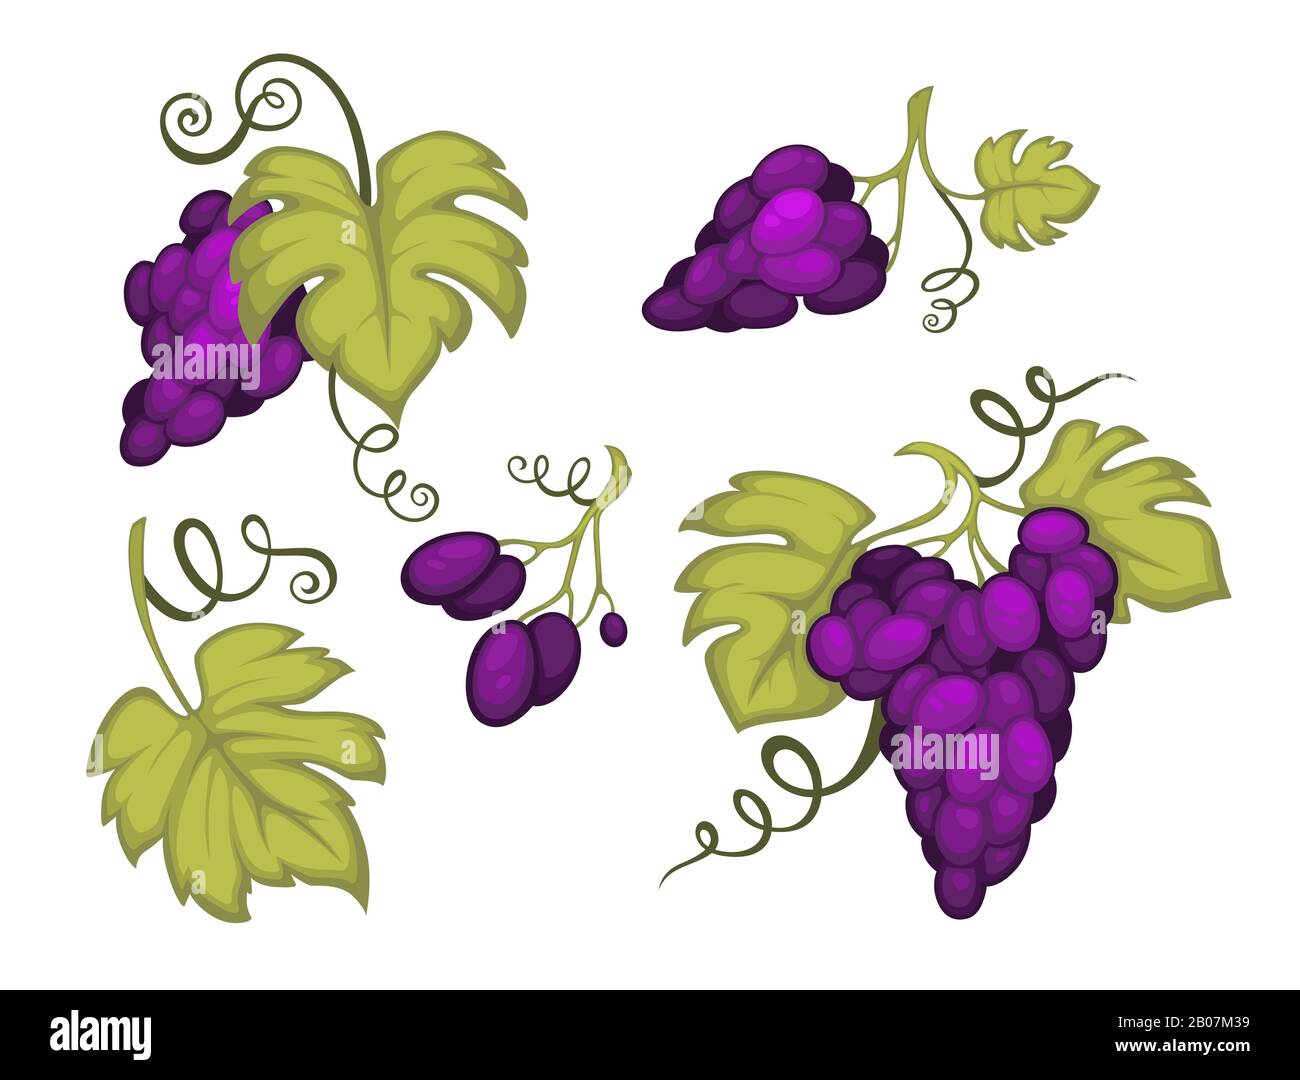 Grapes bunches with leaves isolated icons, berries clusters Stock Vector